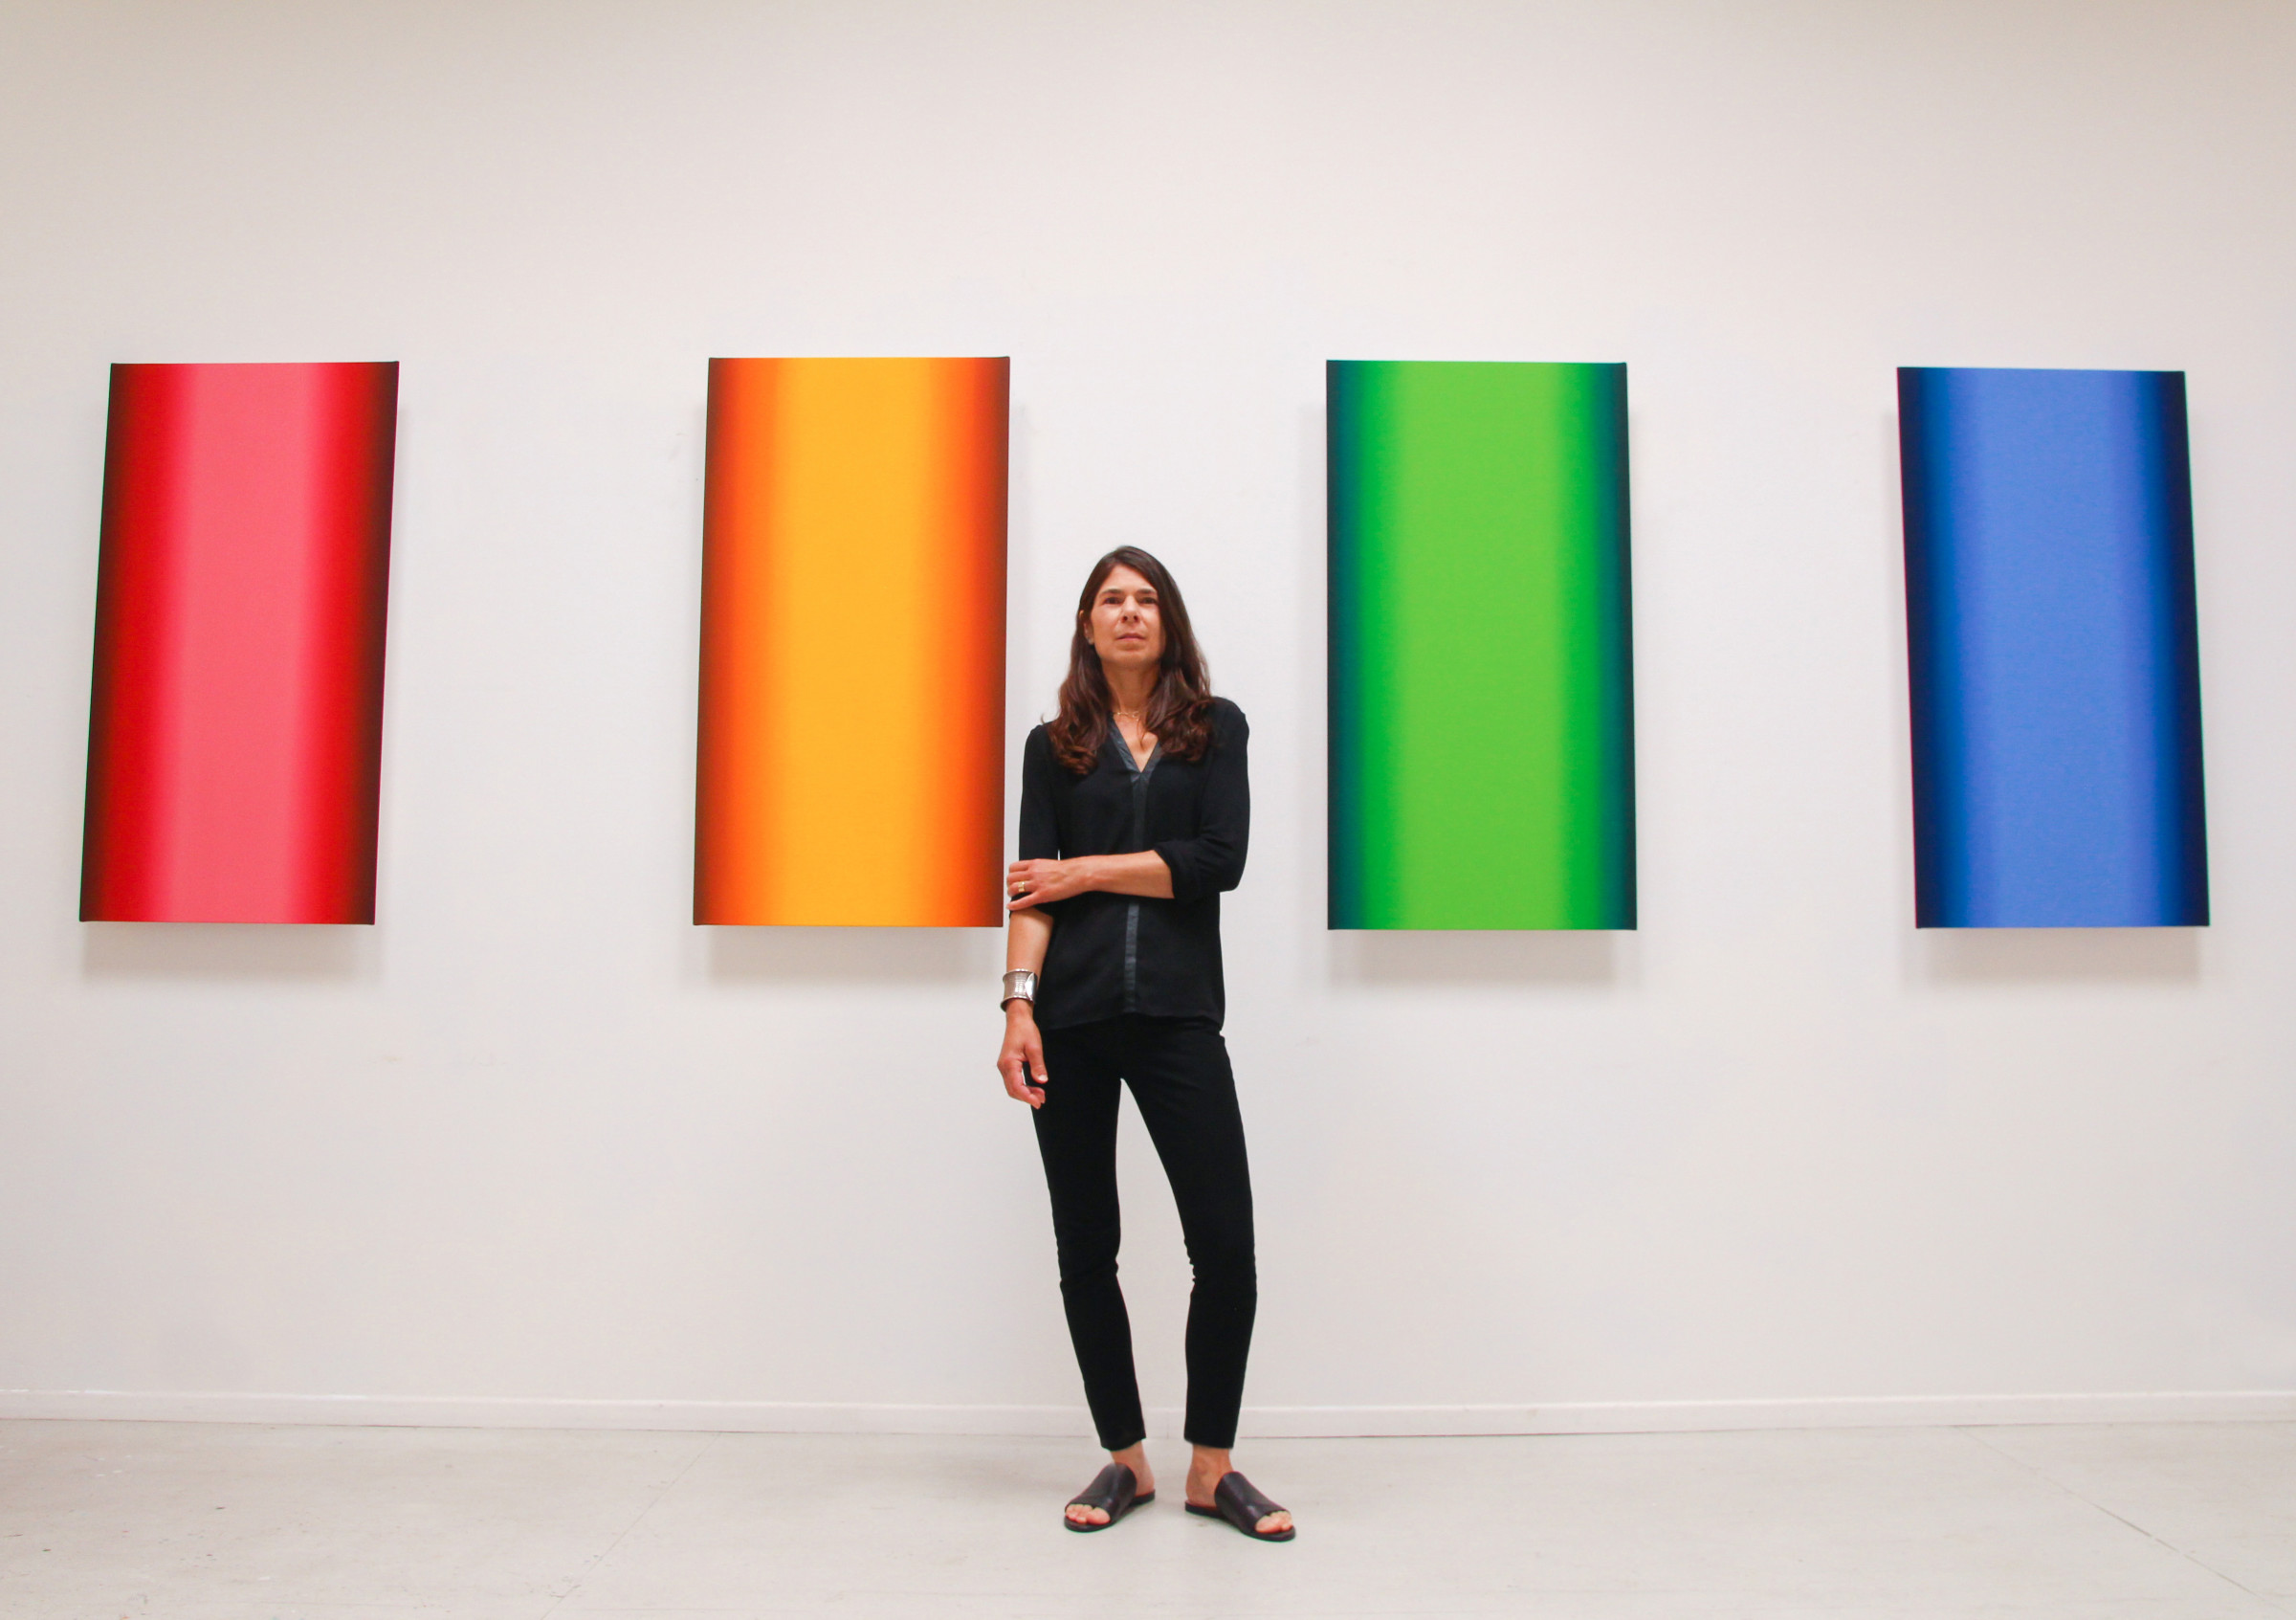 The Phenomenology of Color: An Artist Talk and Exhibition Tour, by Ruth Pastine